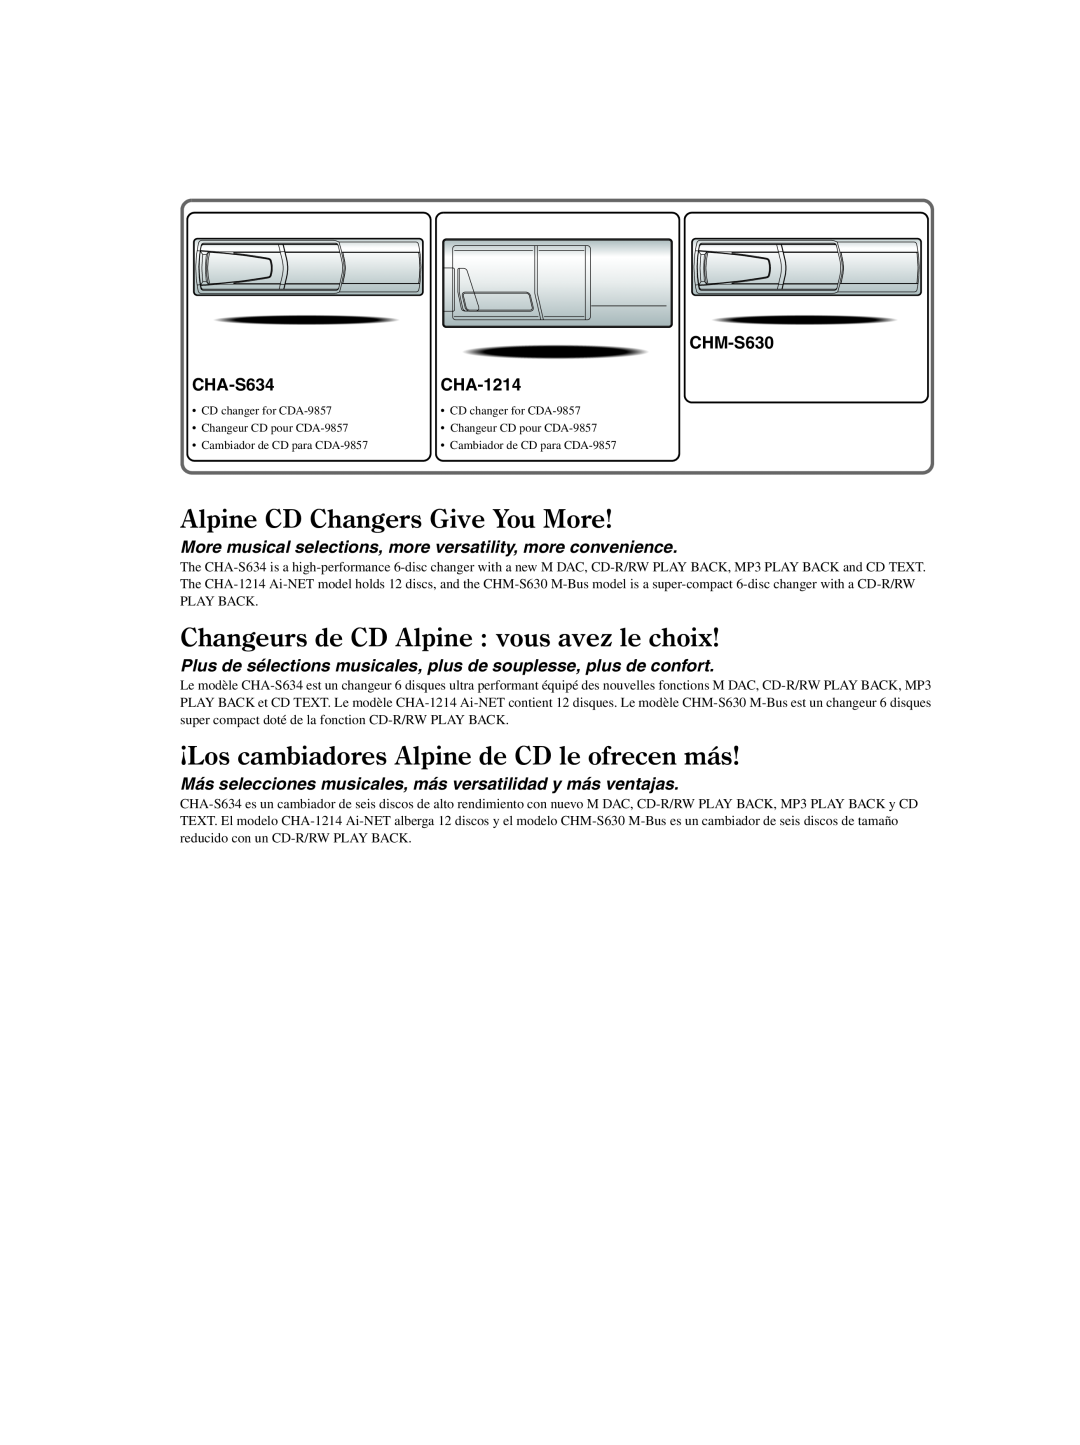 Alpine CDA-9857 owner manual CHM-S630, CHA-S634, CHA-1214, Alpine CD Changers Give You More 